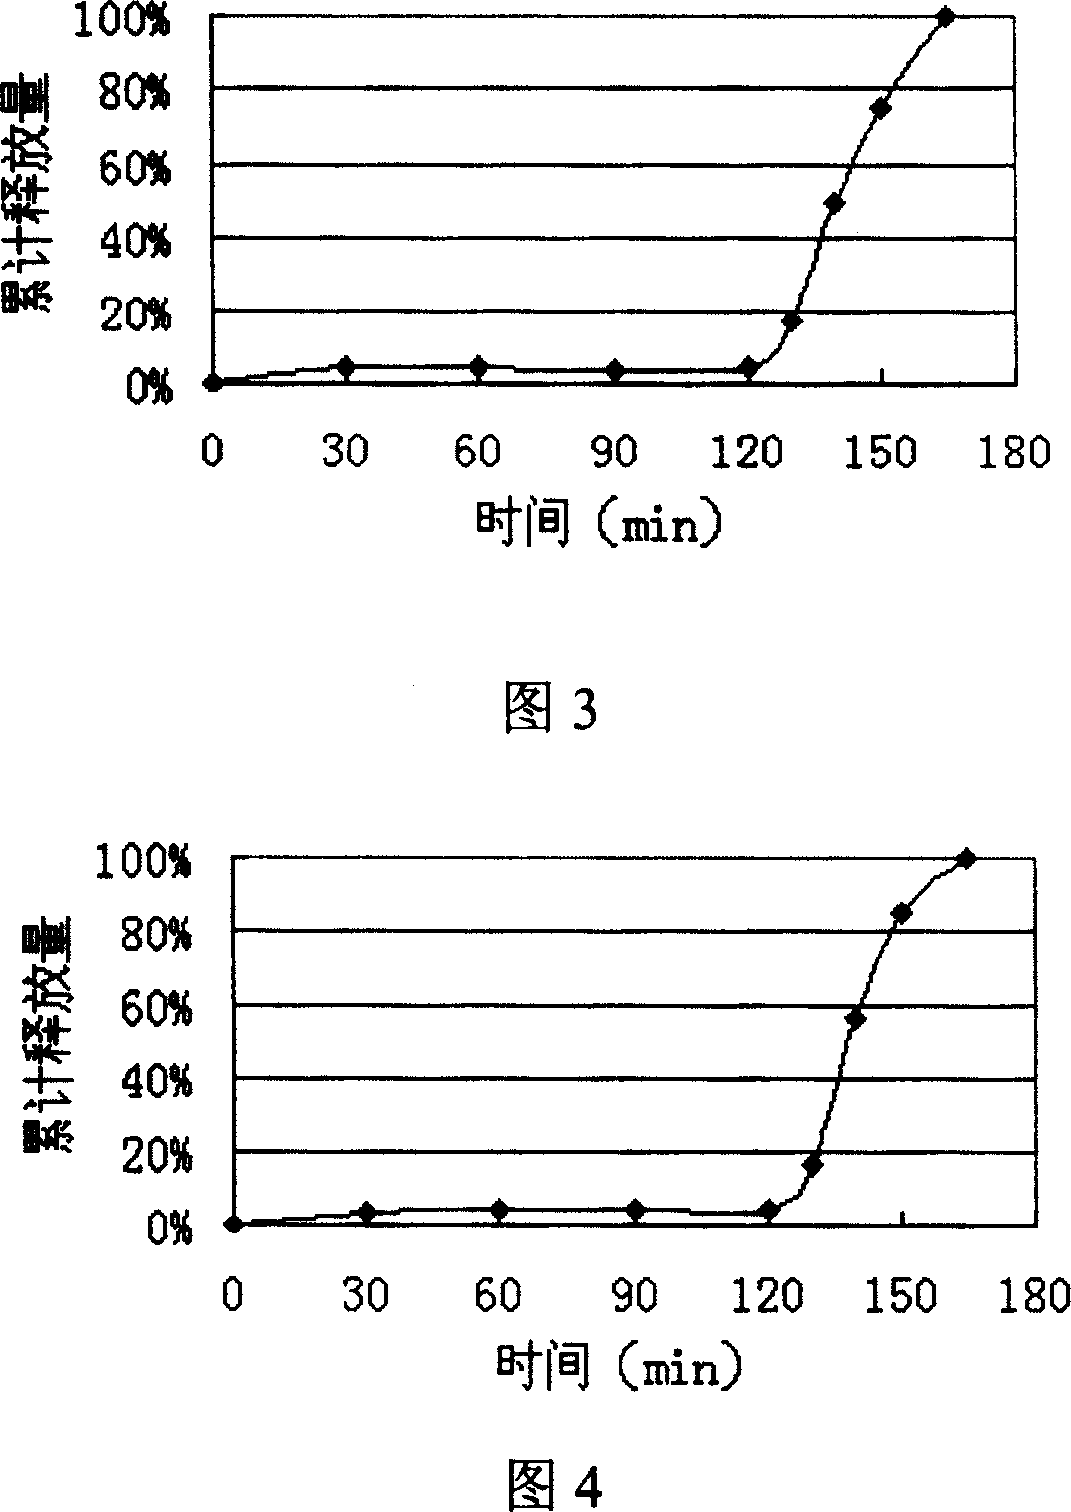 Enteric coated table of duloxetine, and preparation method